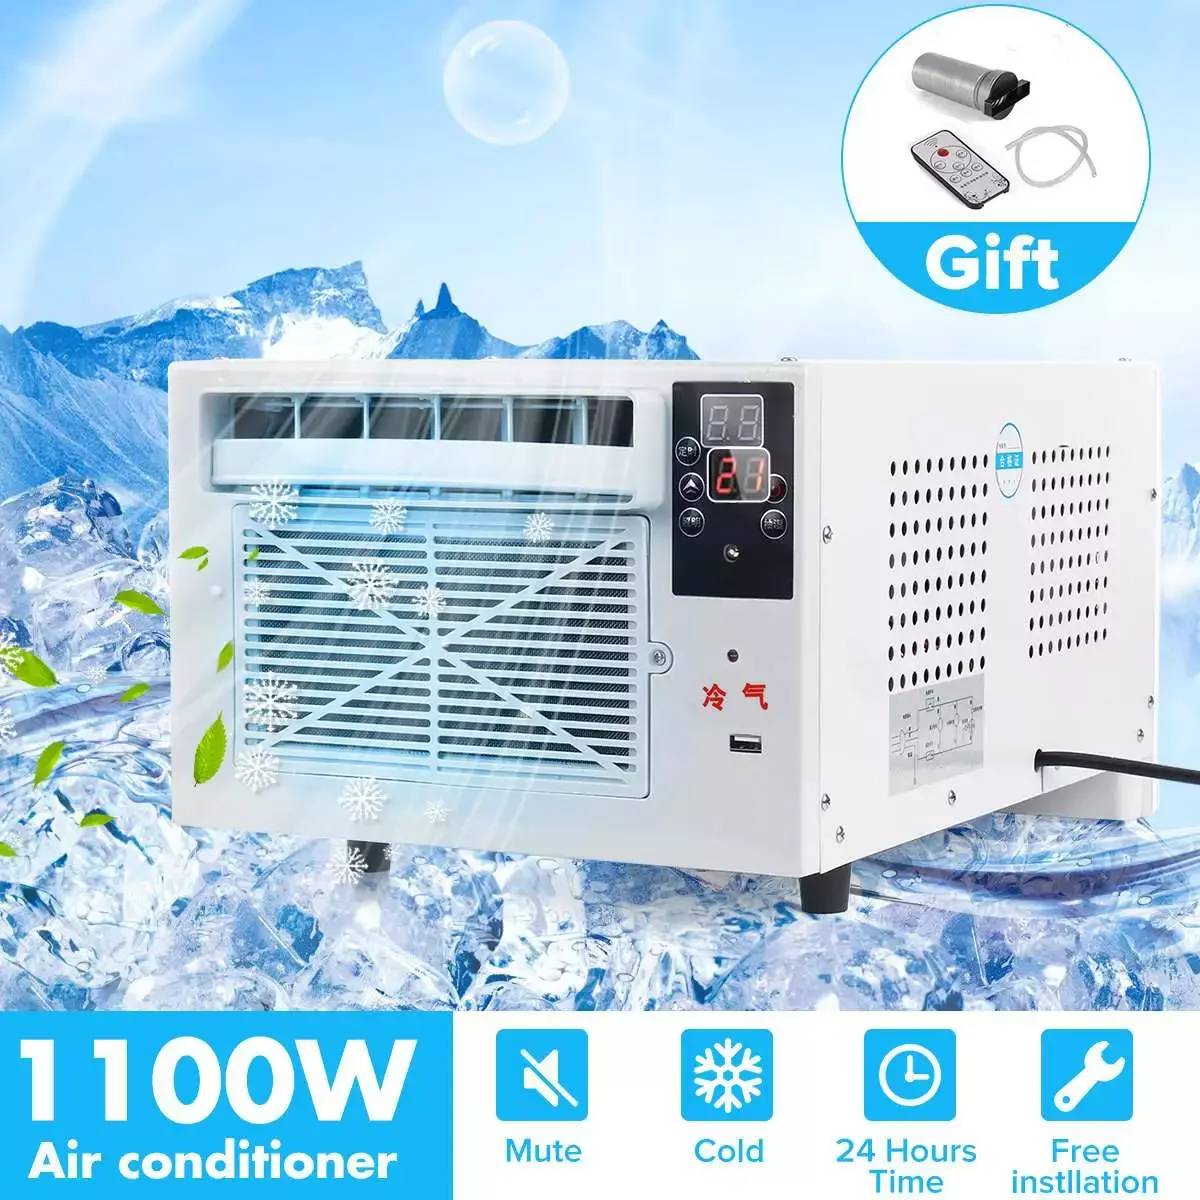 1100W Desktop Air Conditioner 220V Air Conditioning Fan Timing Air Cooler Fans Remote Control Air Conditioner For Home Office enlarge